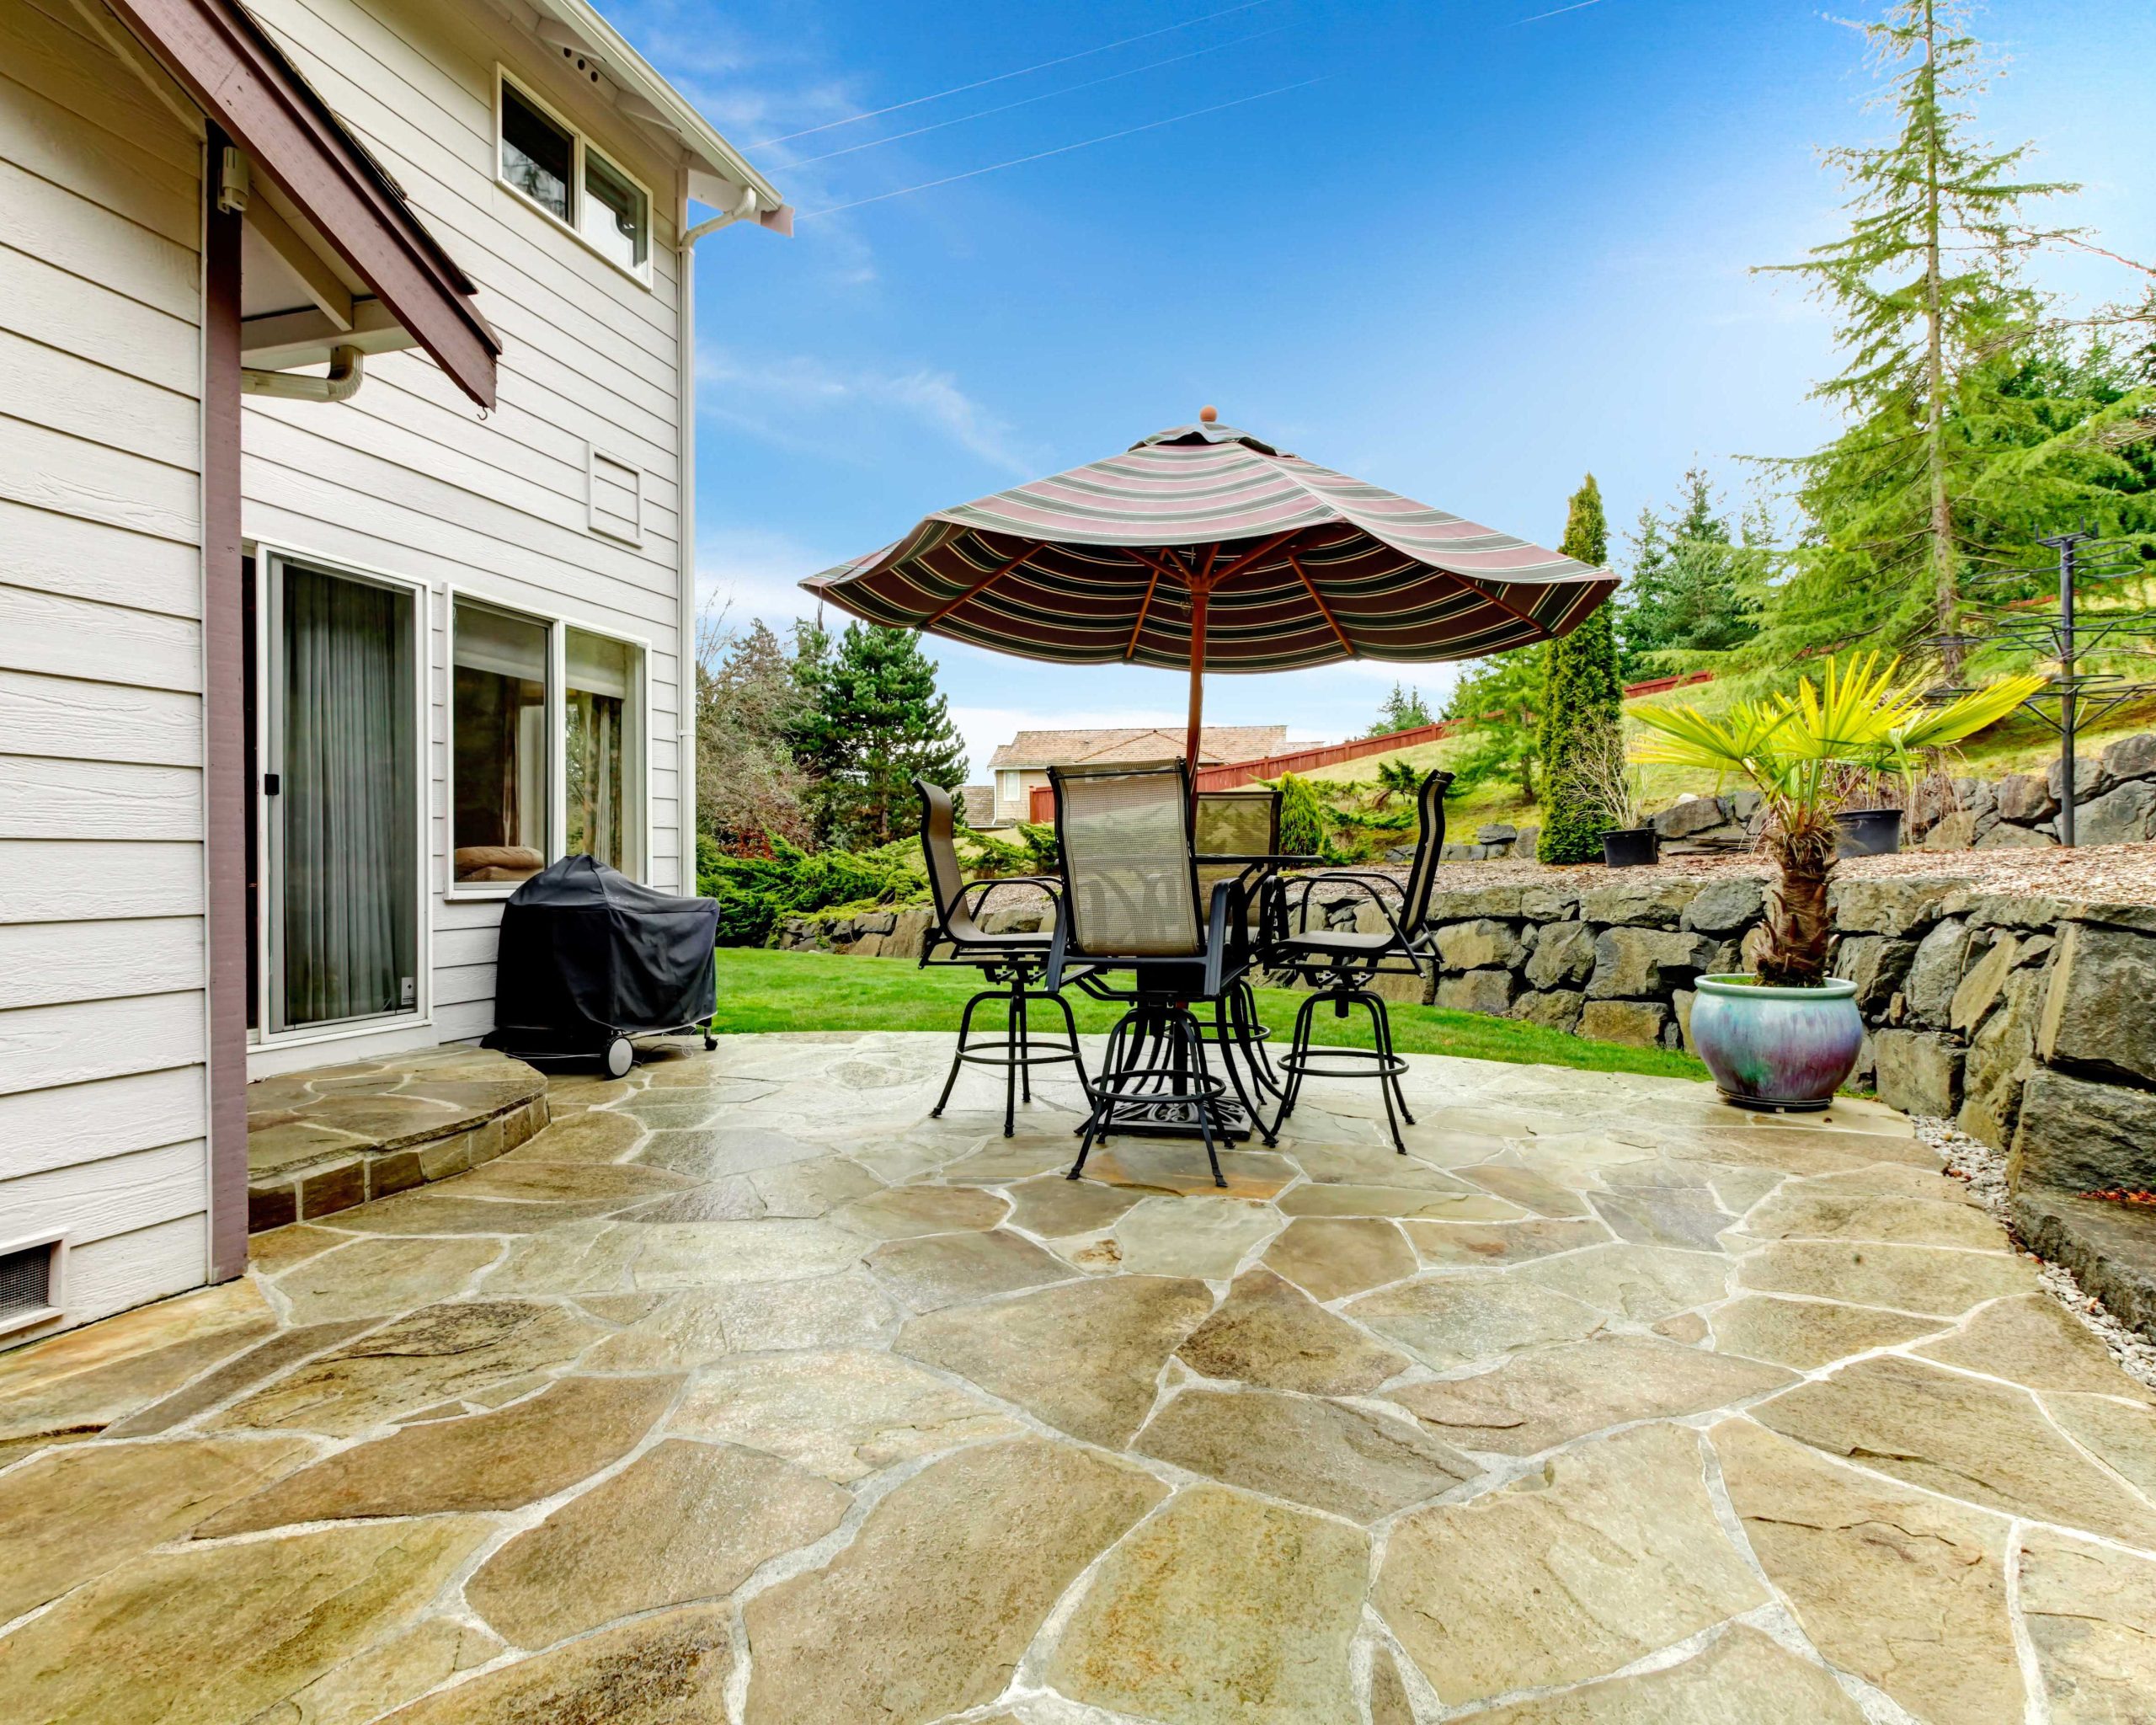 A stamped concrete patio constructed by local concrete contractors near you.